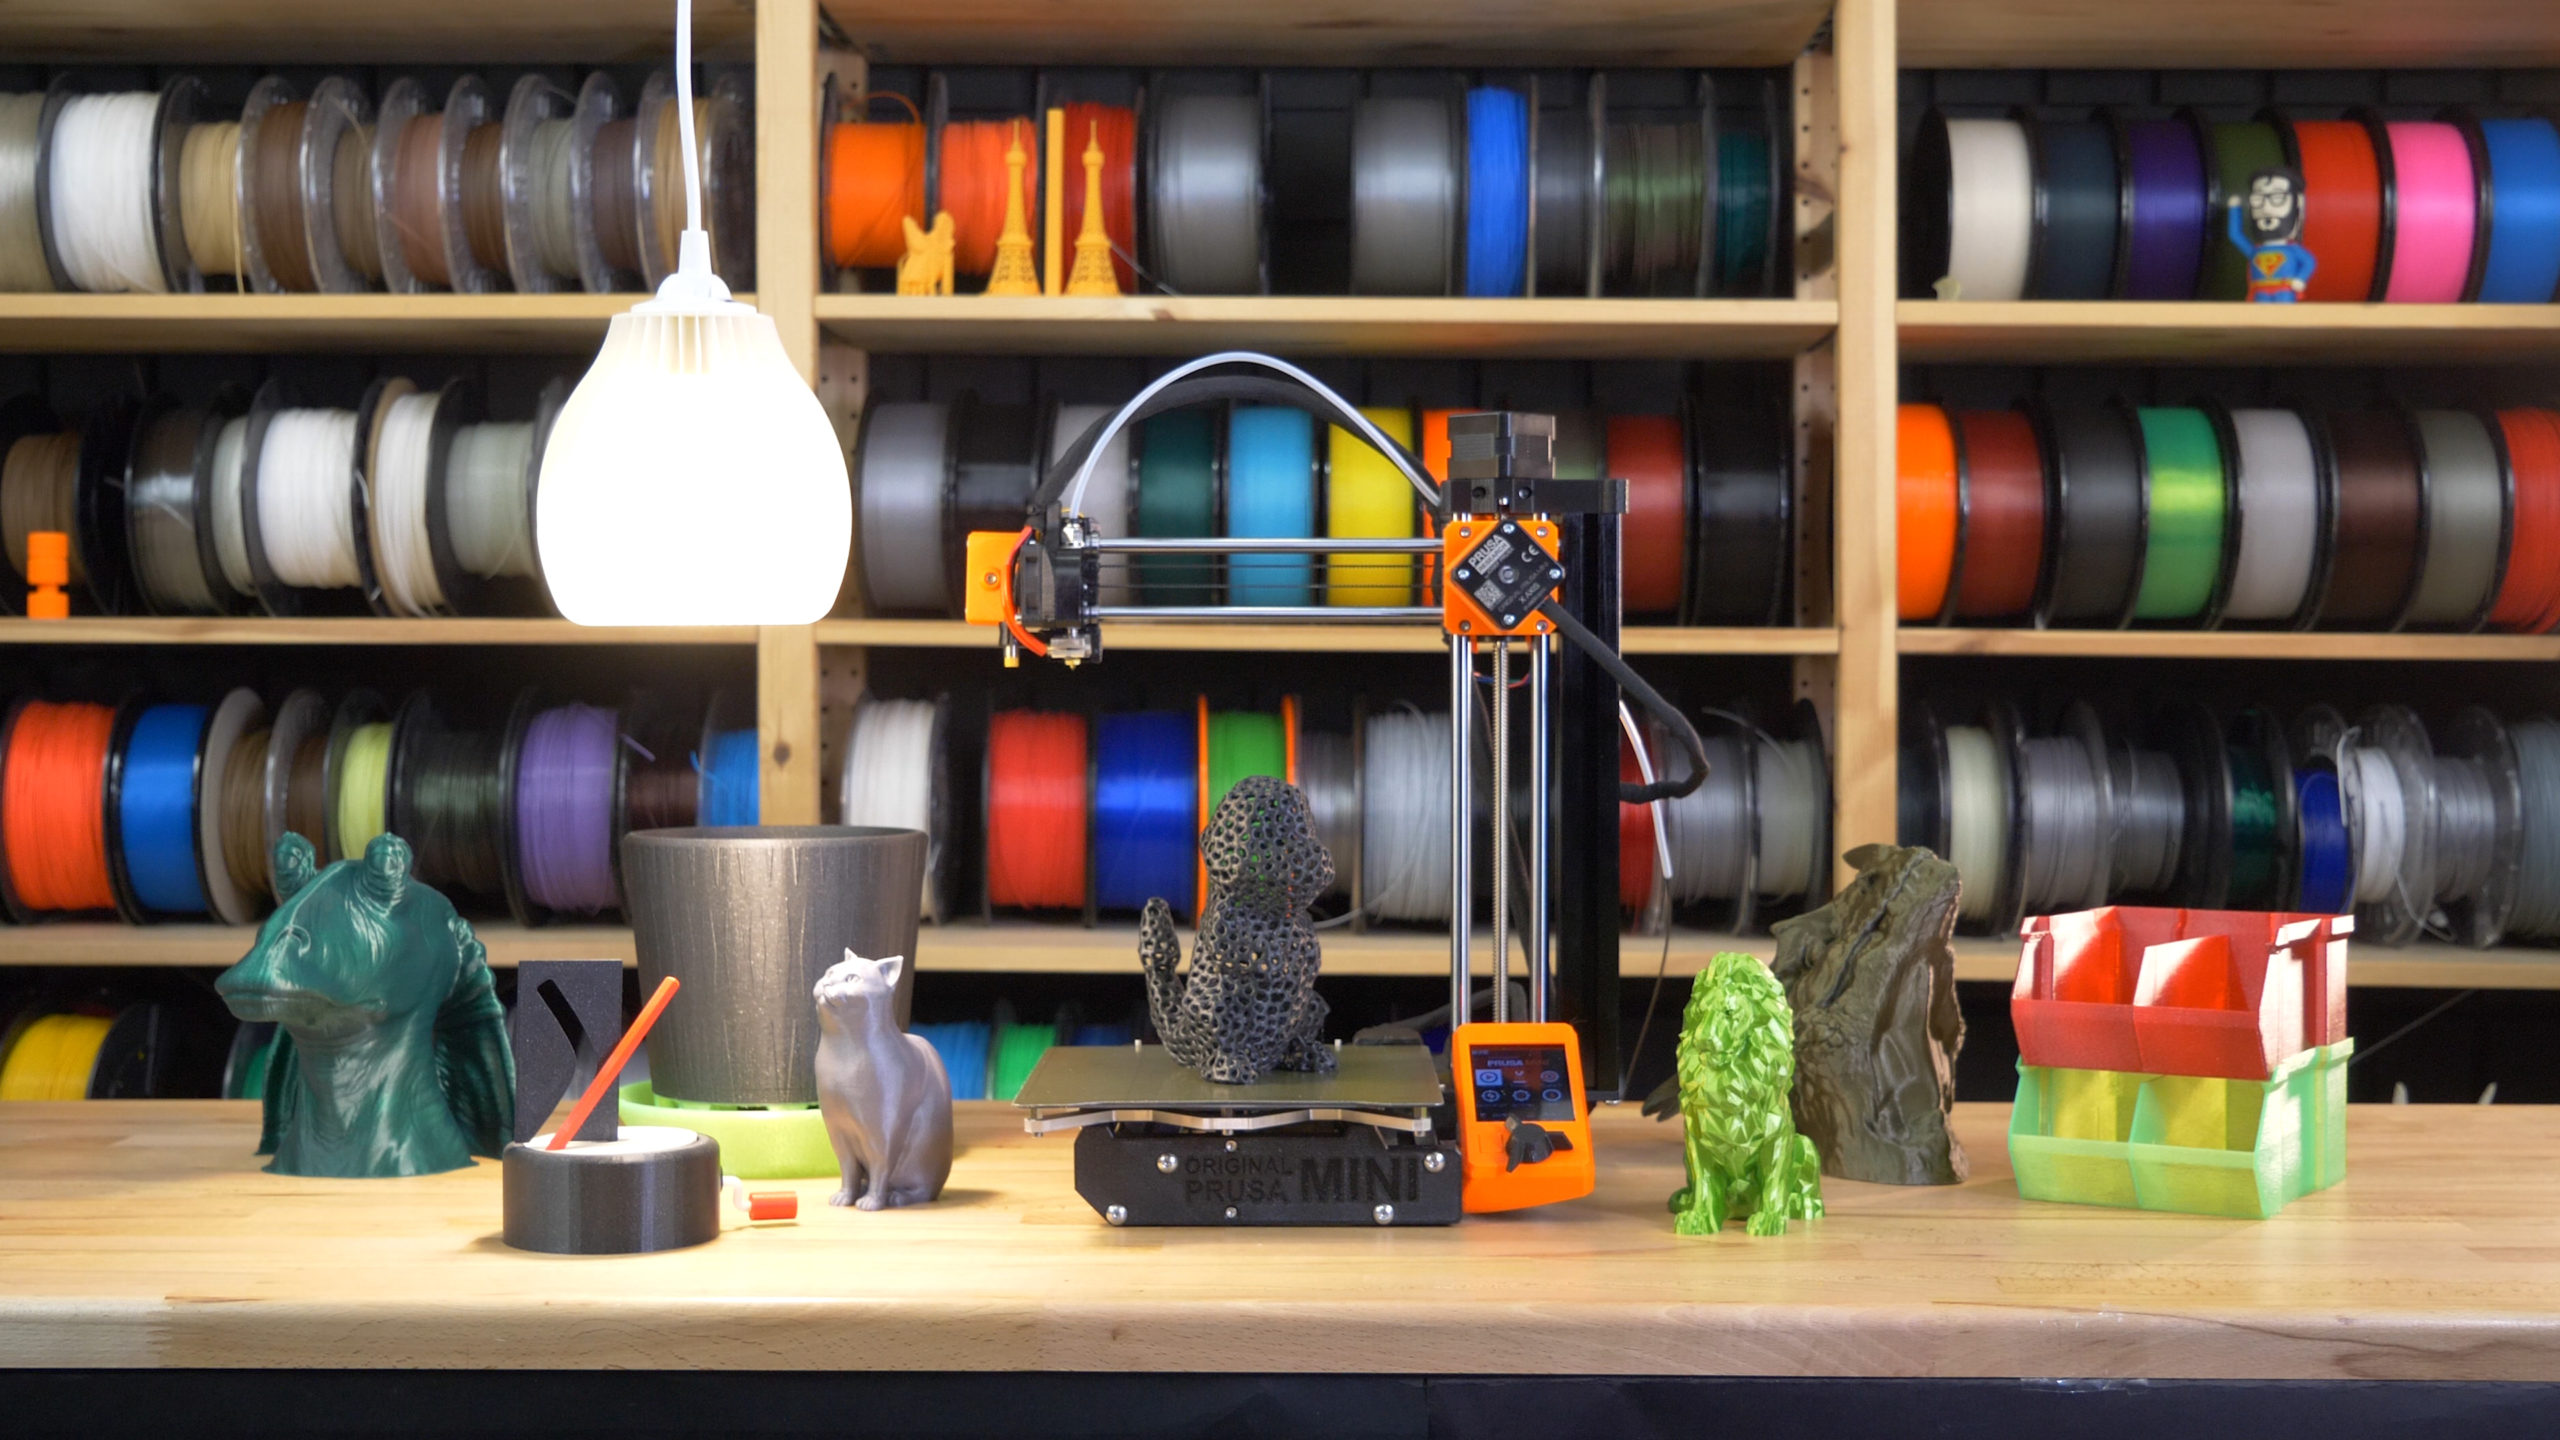 The Original Prusa MINI+: A Compact 3D Printer for Makers and Hobbyists